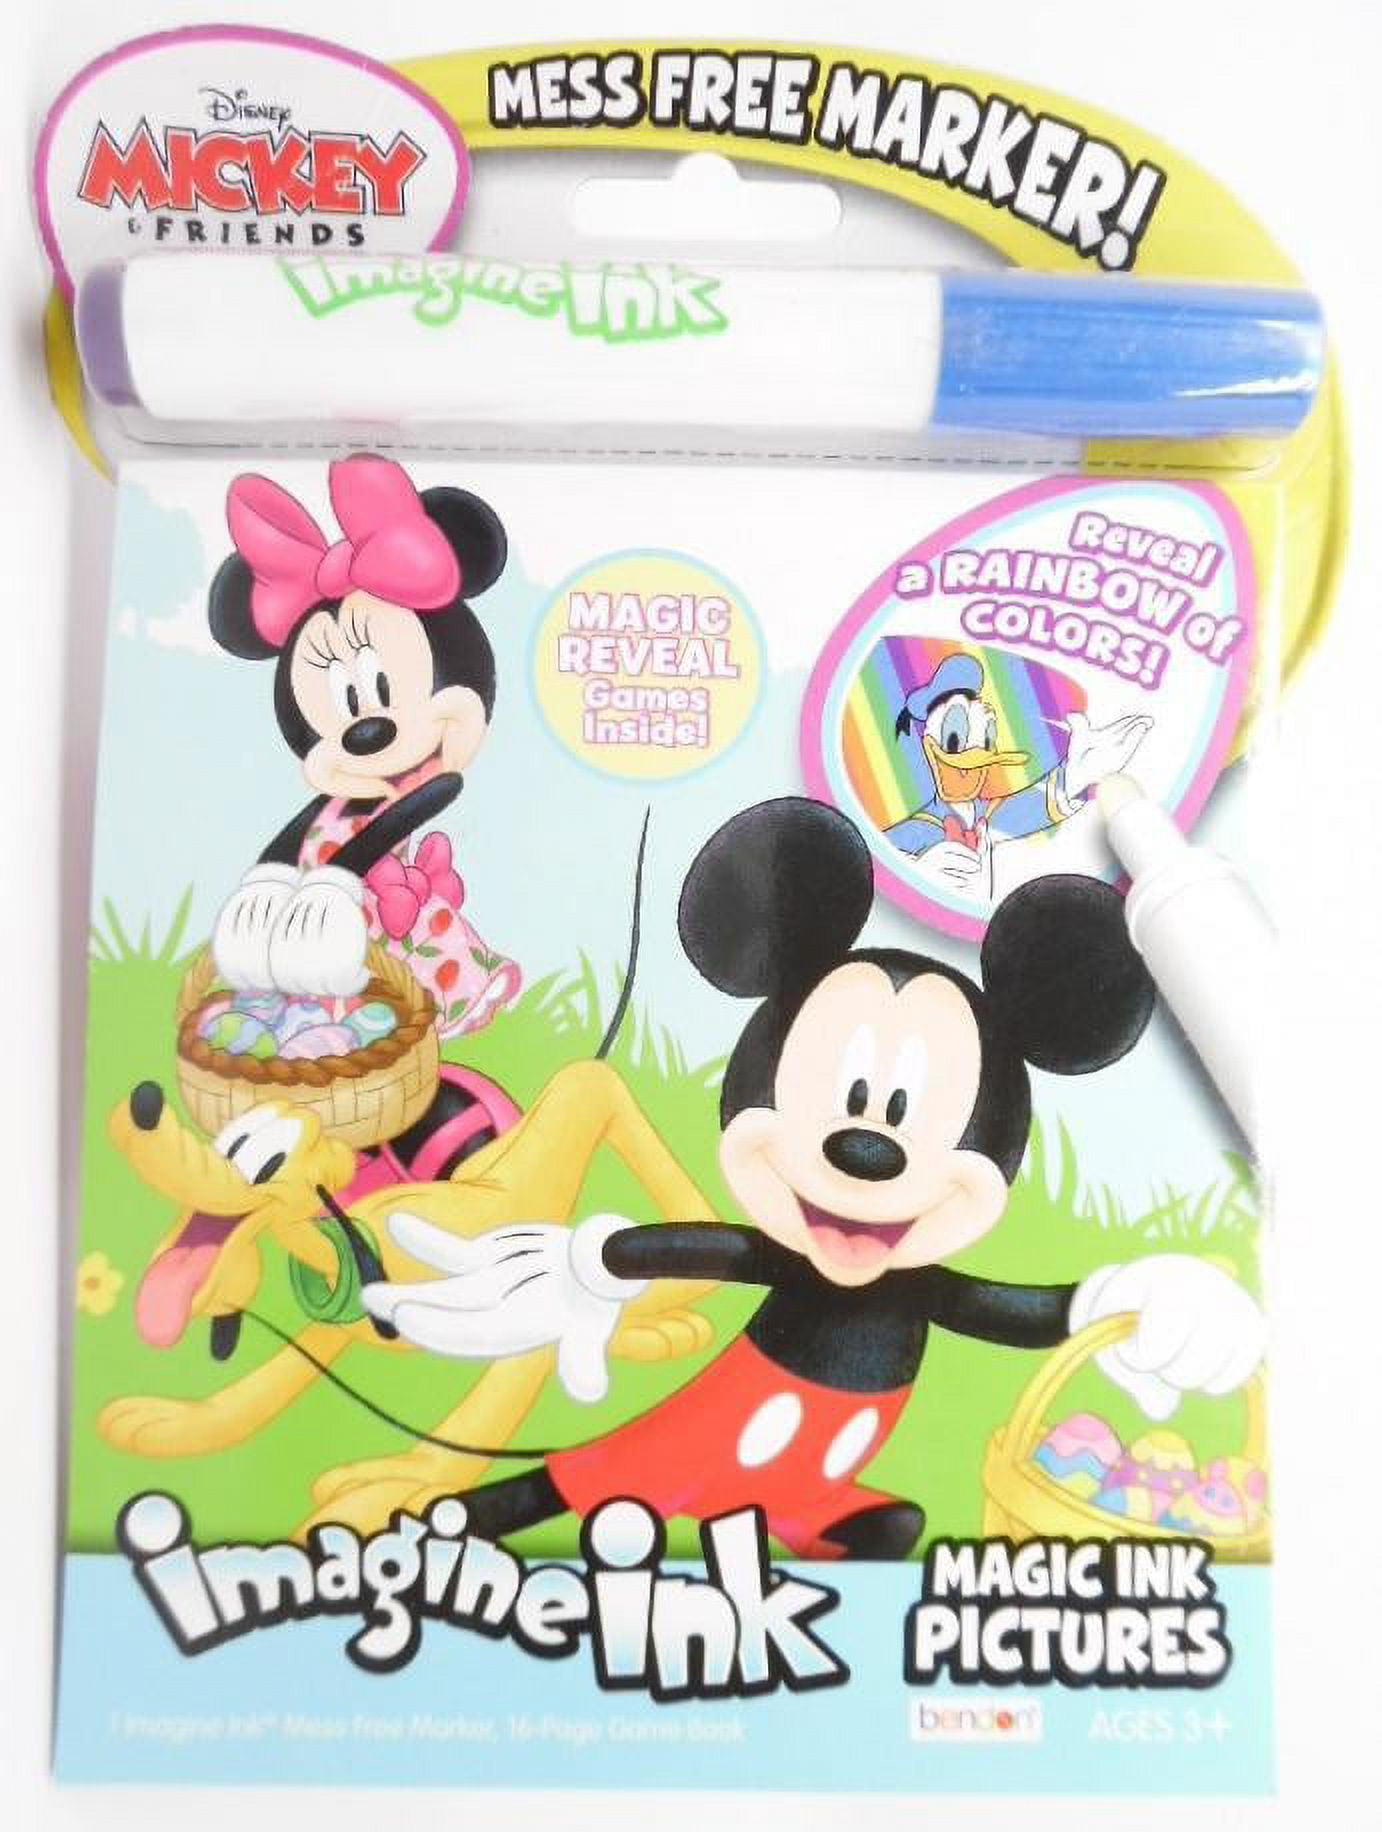 Imagine ink® Magic ink Pictures Mess-Free Coloring Book – Disney